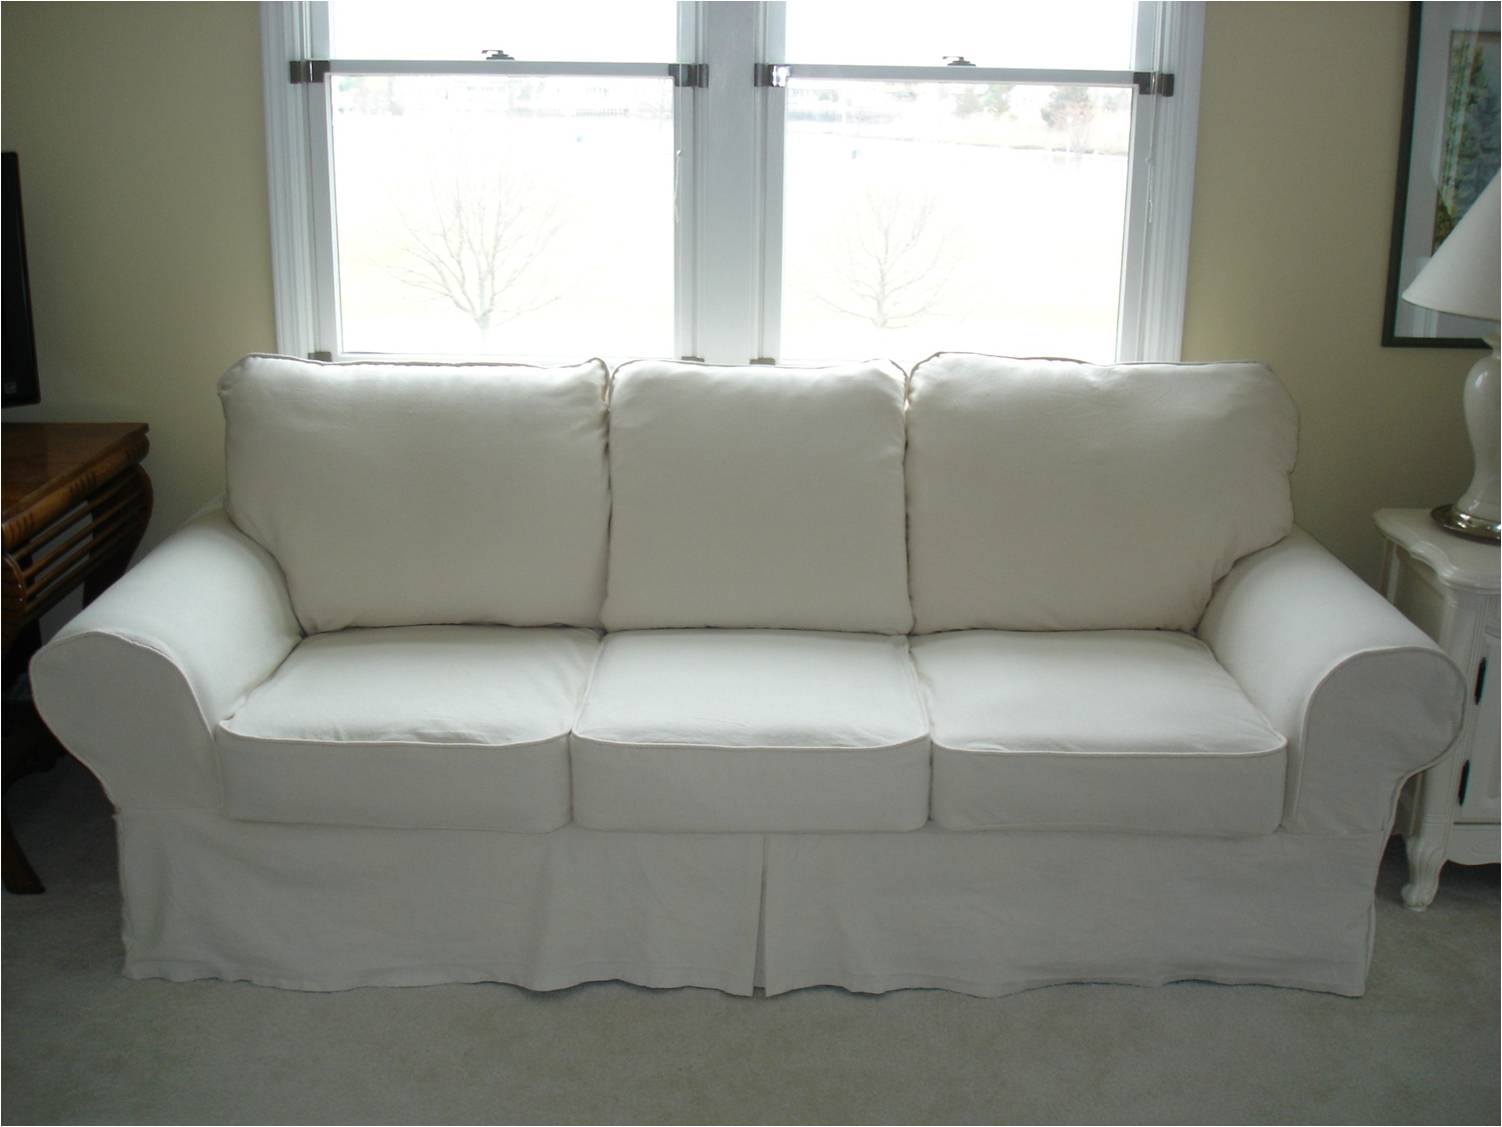 Furniture Feature Friday - Slipcover & Furniture Link Parties | Miss ...